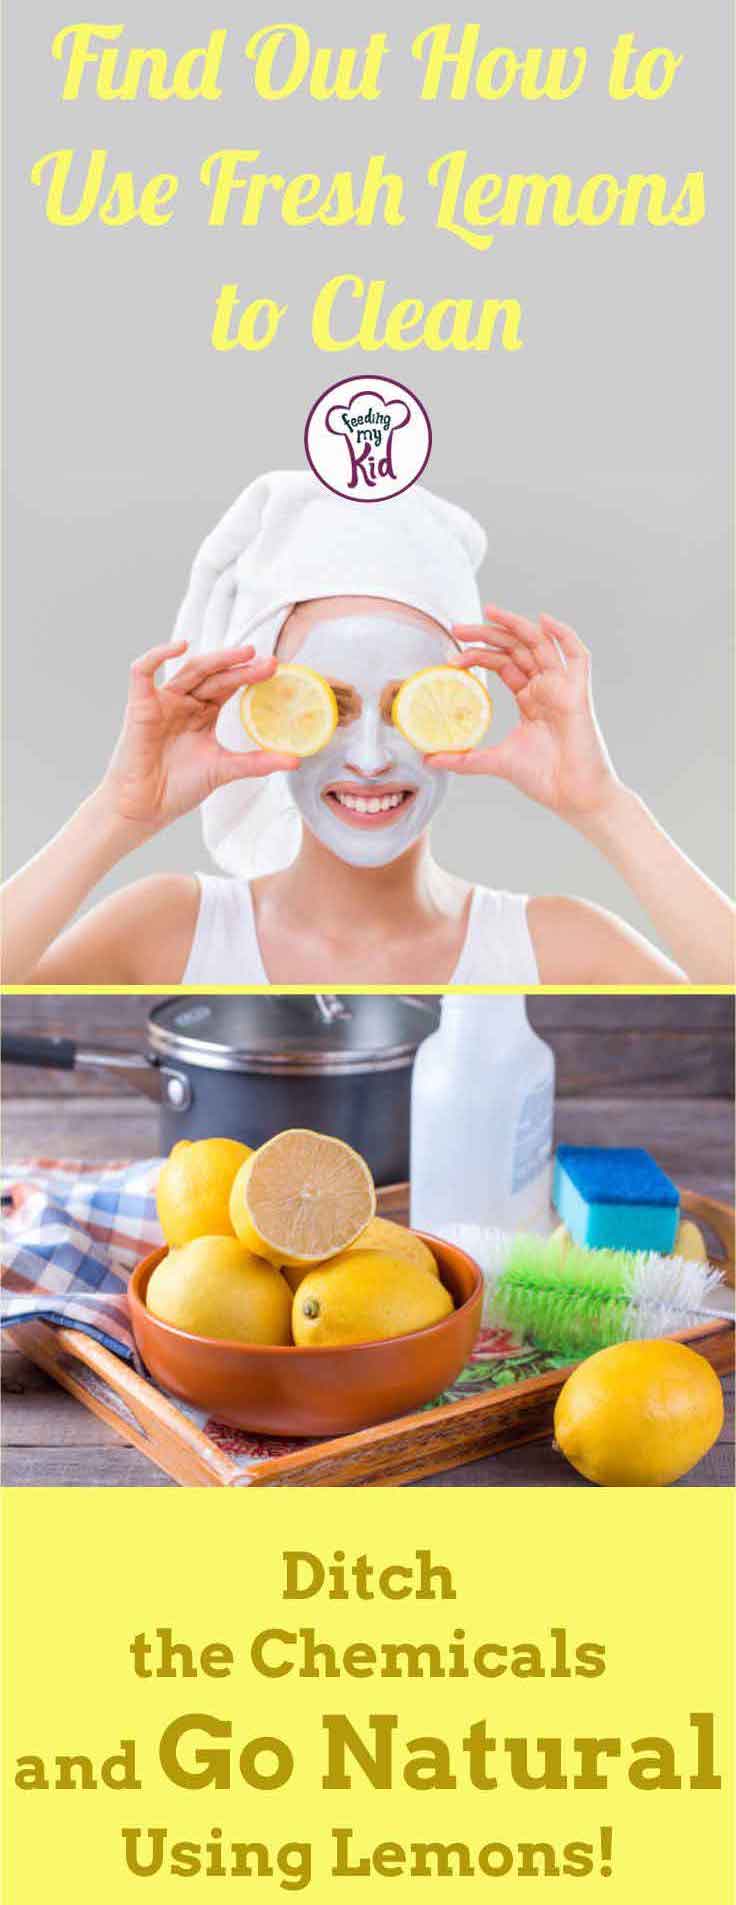 Step outside the cooking scene. Check out these creative lemon uses. Use fresh lemon to highlight your hair, brighten your skin, and more!